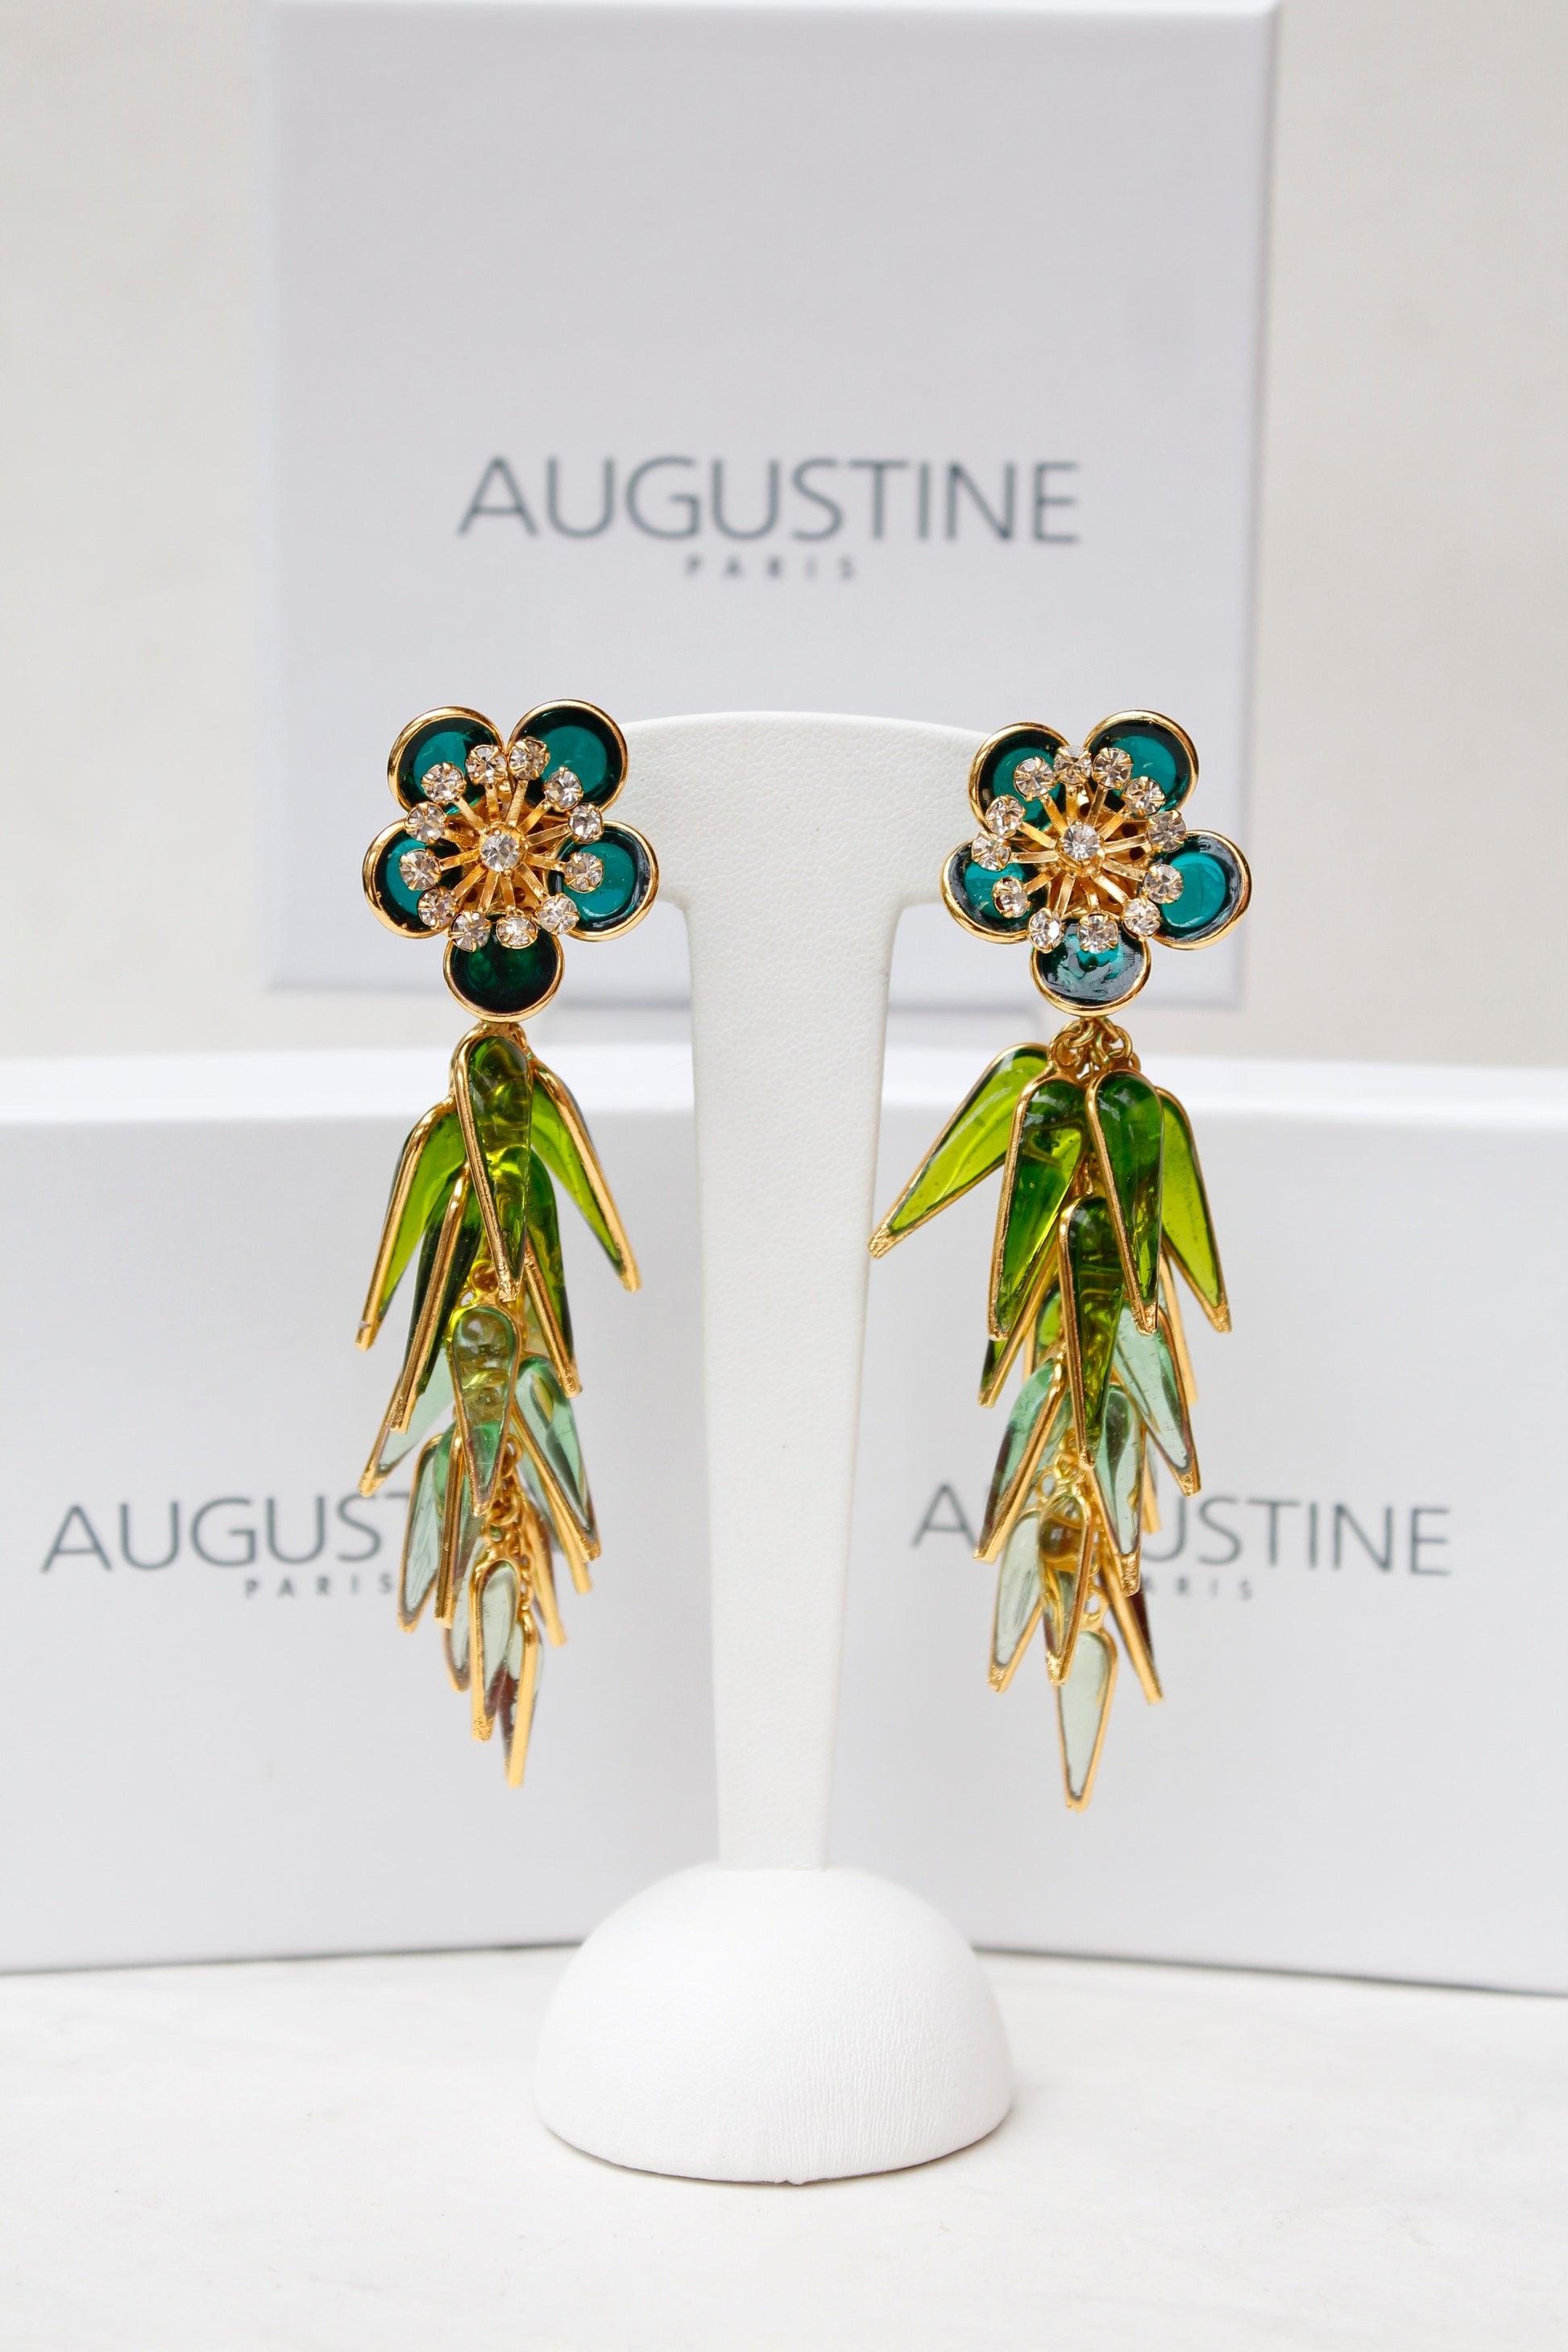 Augustine - (Made in France) Golden metal earrings with glass paste and rhinestones.

Additional information:
Condition: Mint condition
Dimensions: Length: 9 cm (3.54